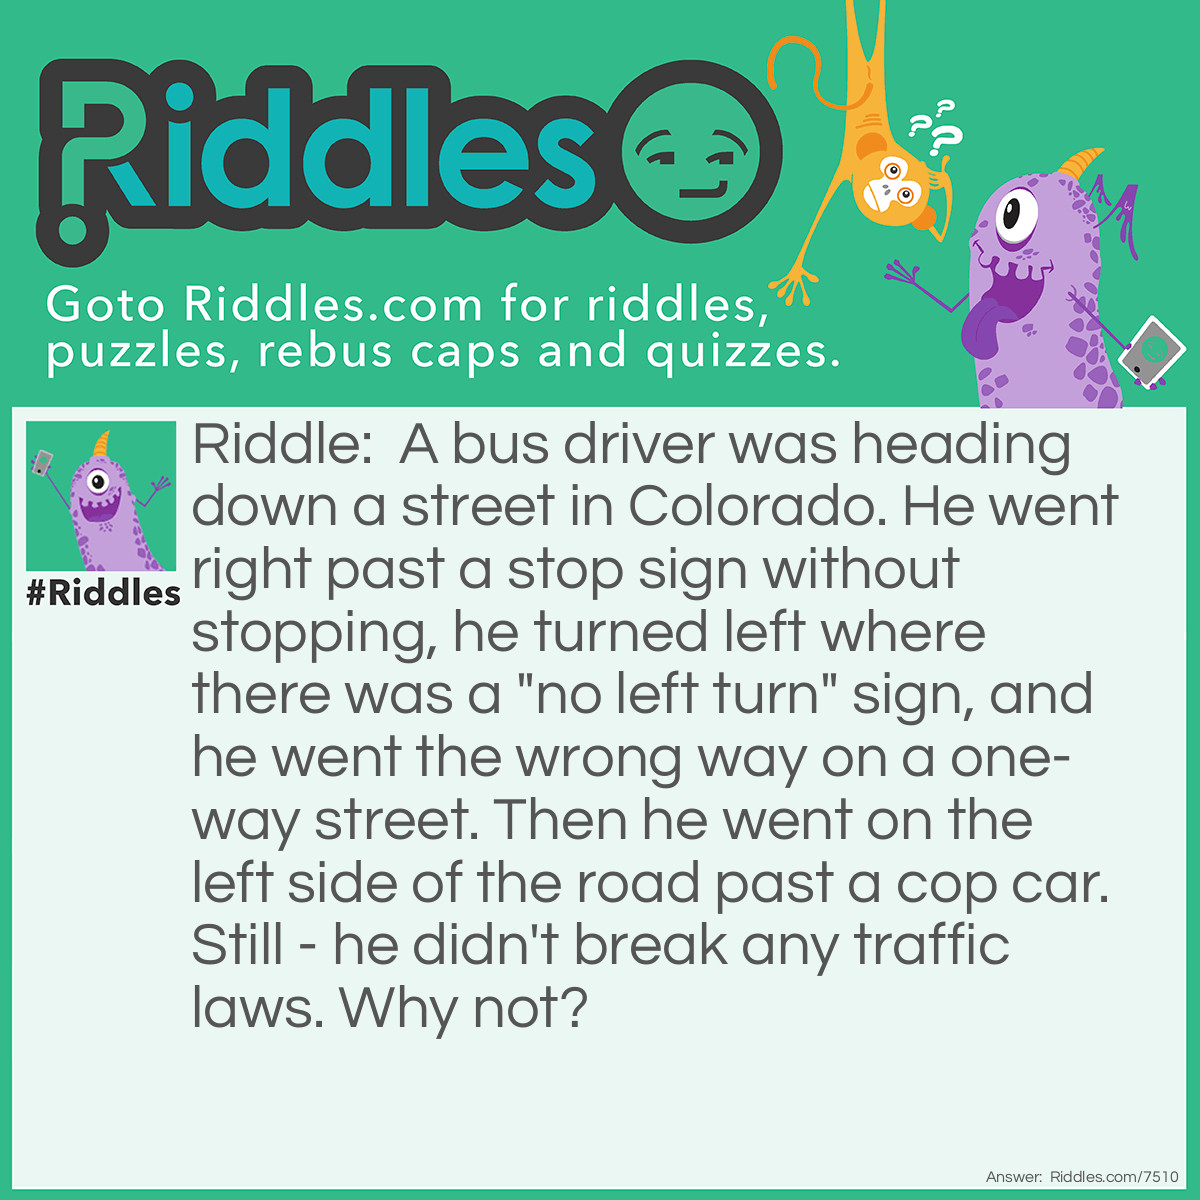 Riddle: A bus driver was heading down a street in Colorado. He went right past a stop sign without stopping, he turned left where there was a "no left turn" sign, and he went the wrong way on a one-way street. Then he went on the left side of the road past a cop car. Still - he didn't break any traffic laws. Why not? Answer: It was opposite day!